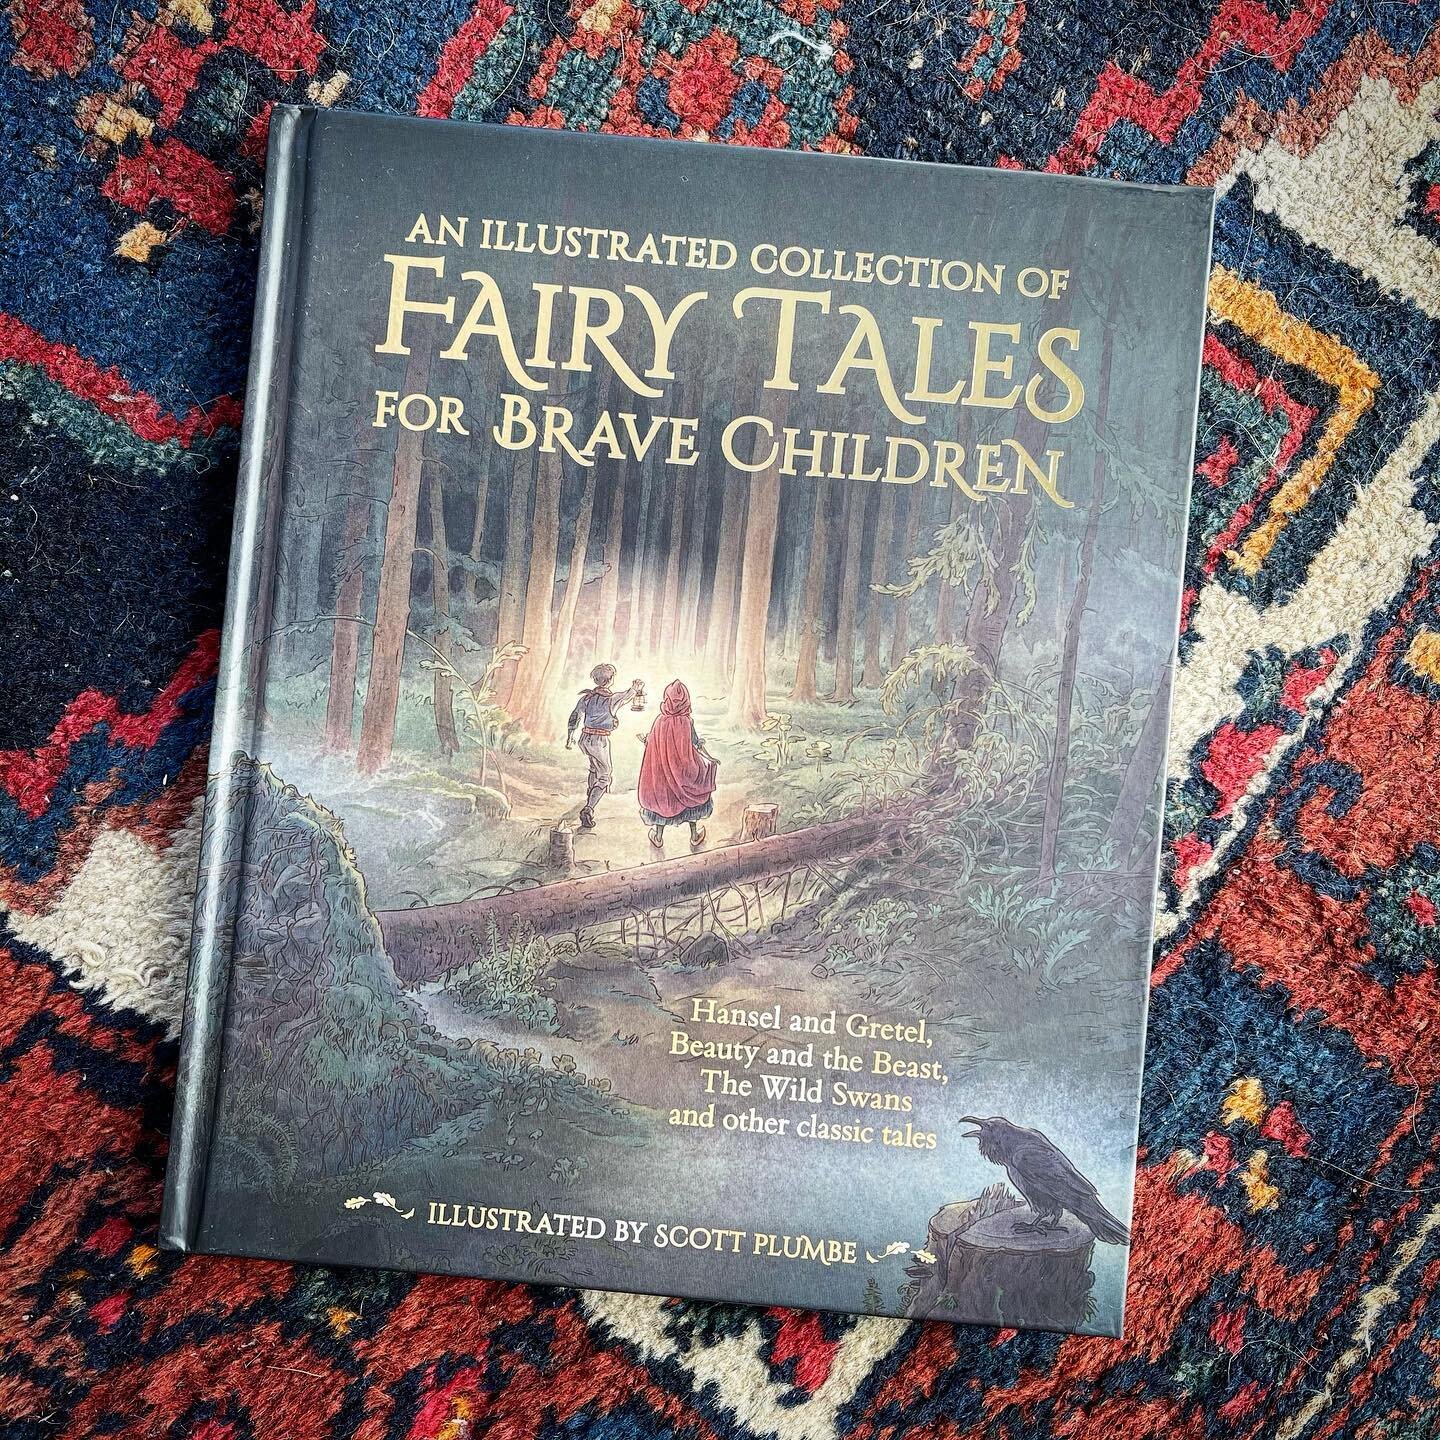 Hi all! I hope everyone is keeping safe. For those with an interest, Fairytales for Brave Children came out in the UK in September. This is the first English language edition by @florisbooks illustrated by me with stories by Jacob and Wilhelm Grimm, 